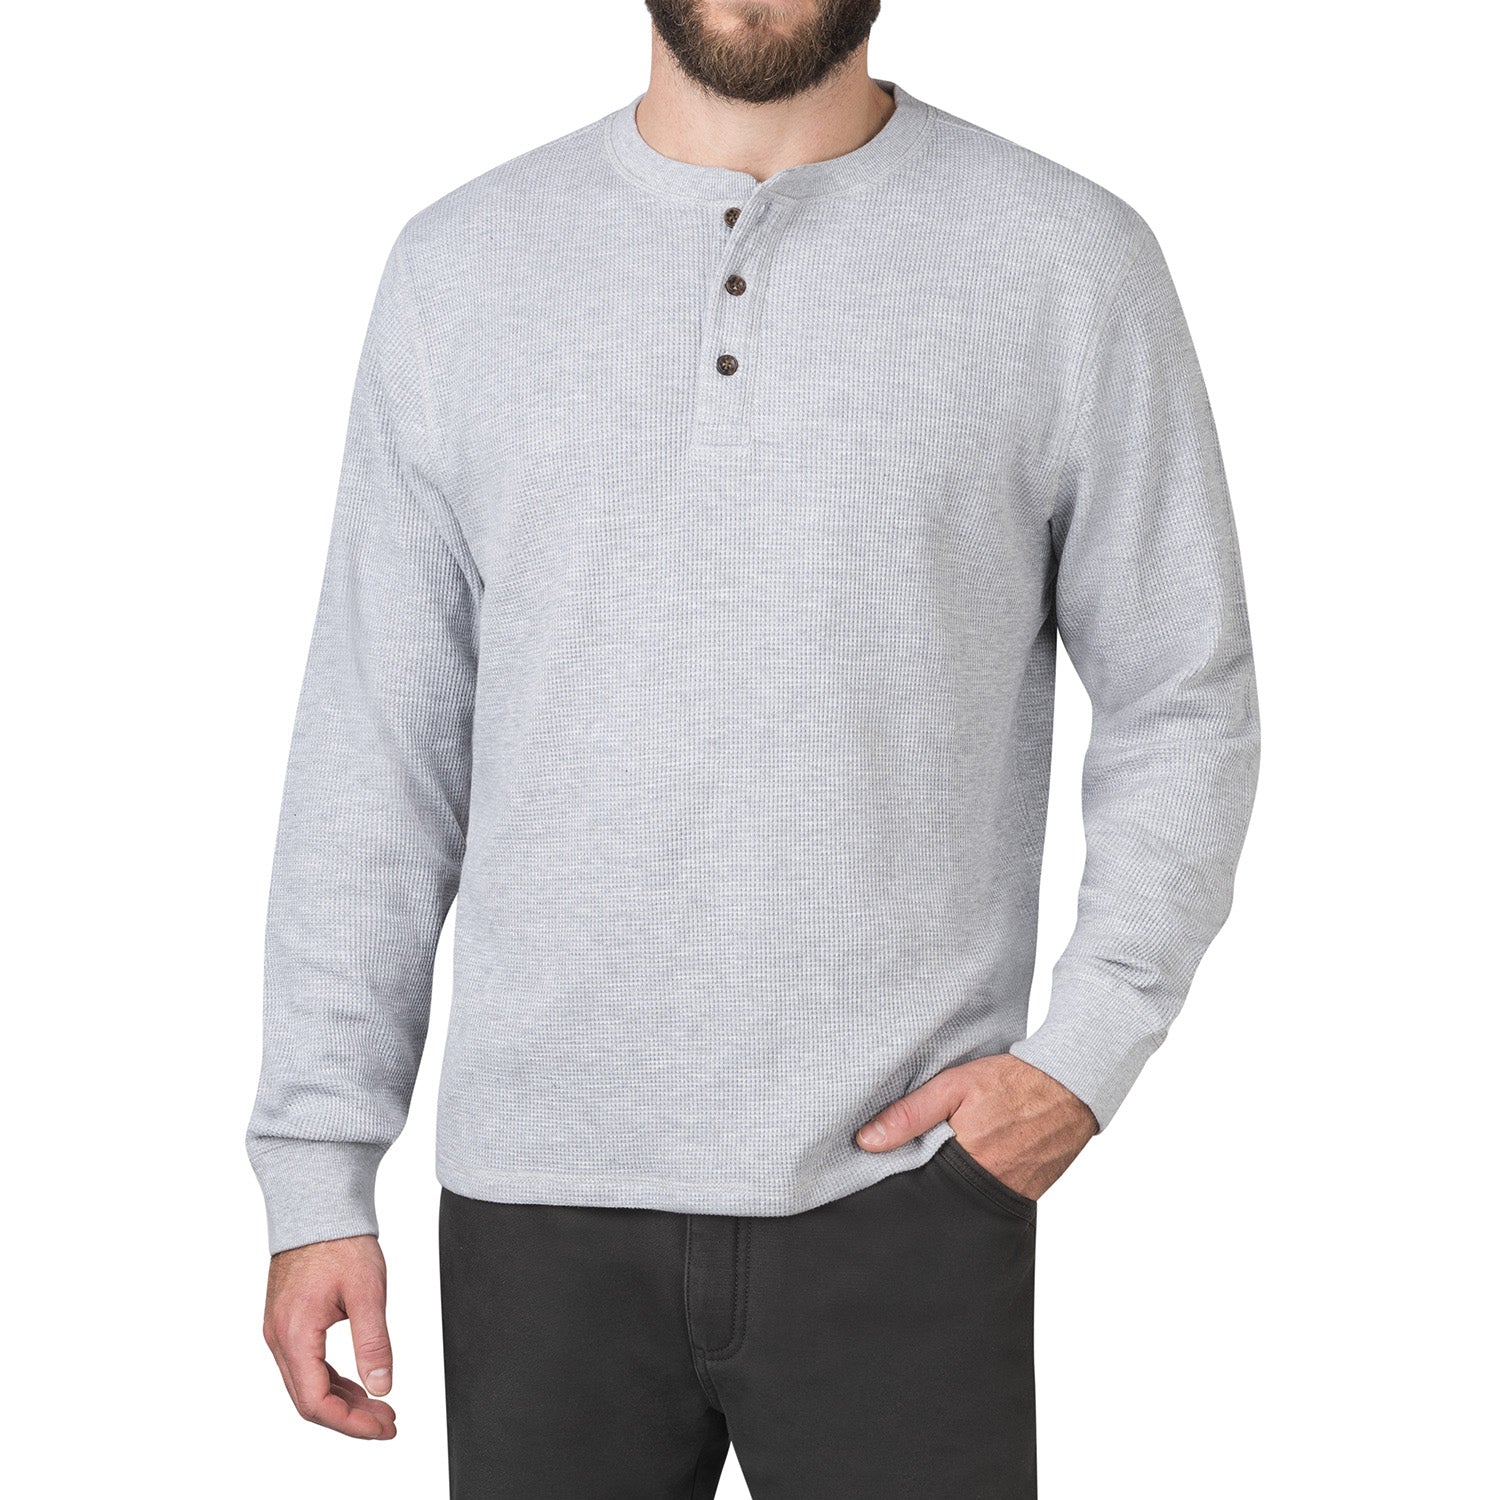 Men's Waffle Long-Sleeve Henley — Native Summit Adventure Outfitters